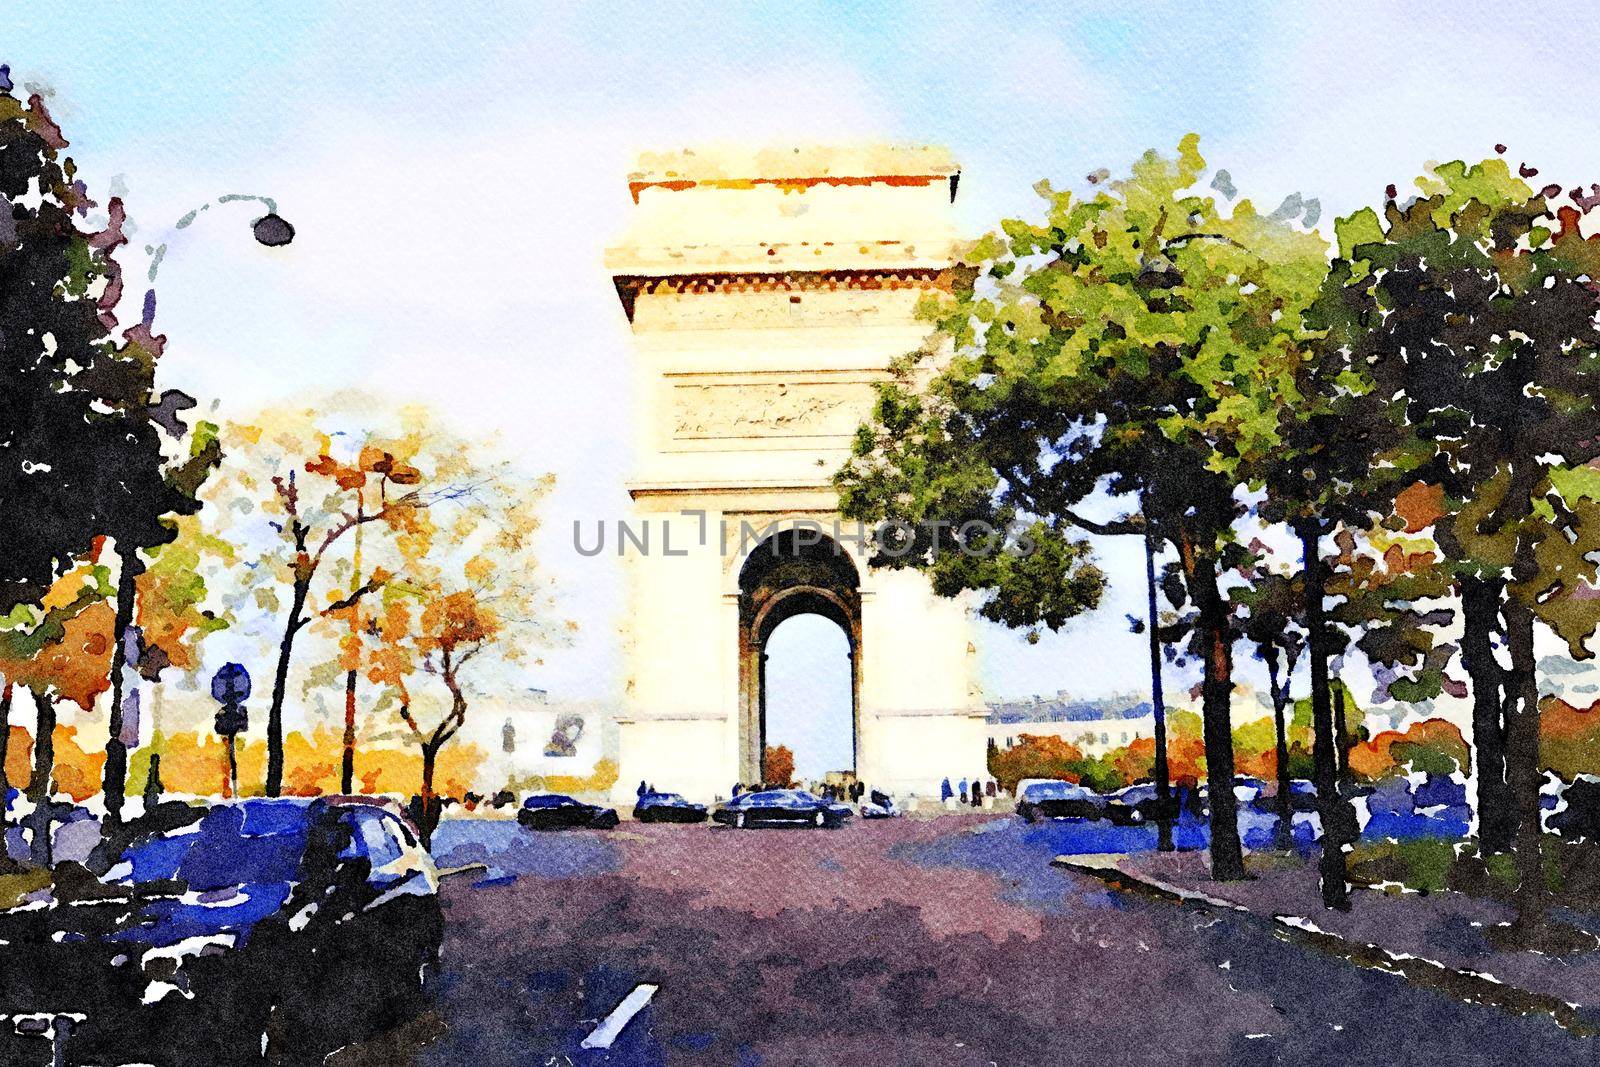 watercolor of the arc de triomphe in Paris on an autumn day